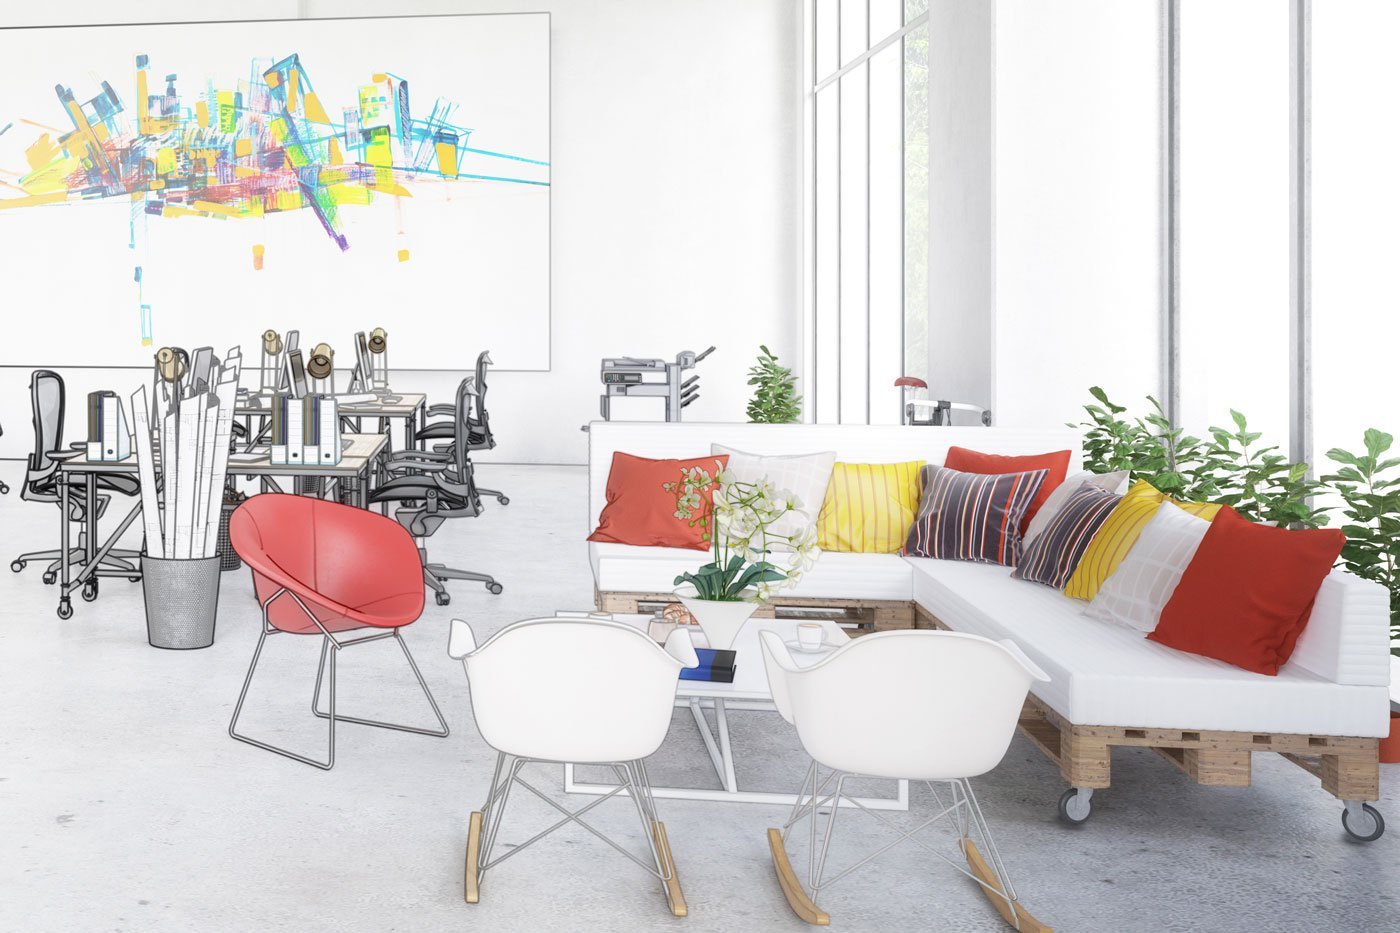 colorful office furniture and sketch of office workstations